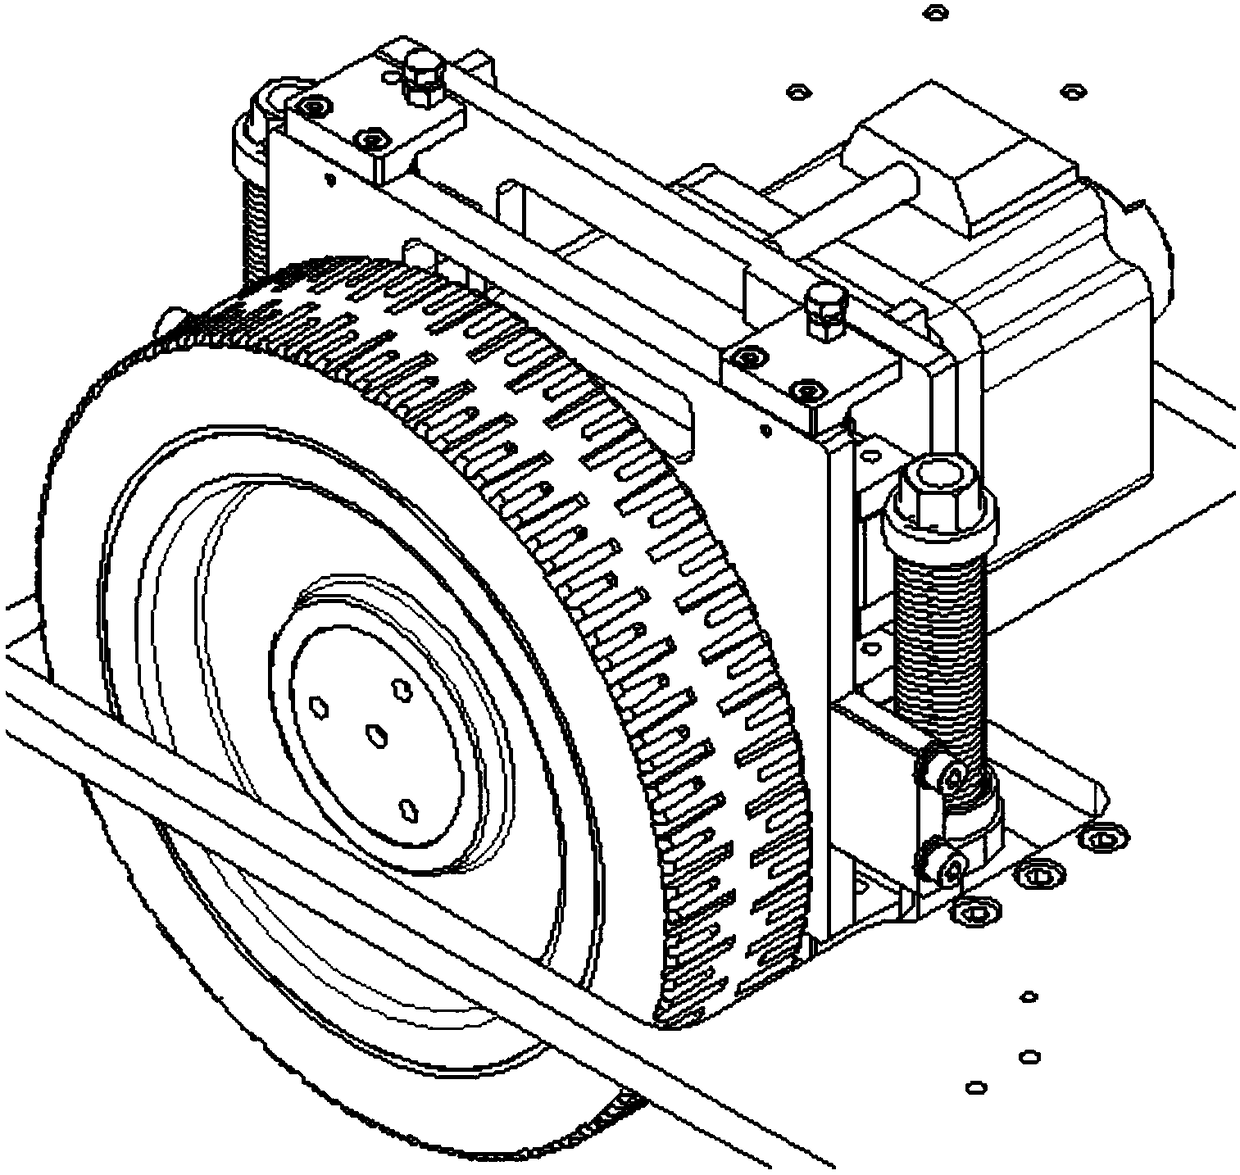 Driving wheel suspension damping mechanism for AGV, chassis and AGV